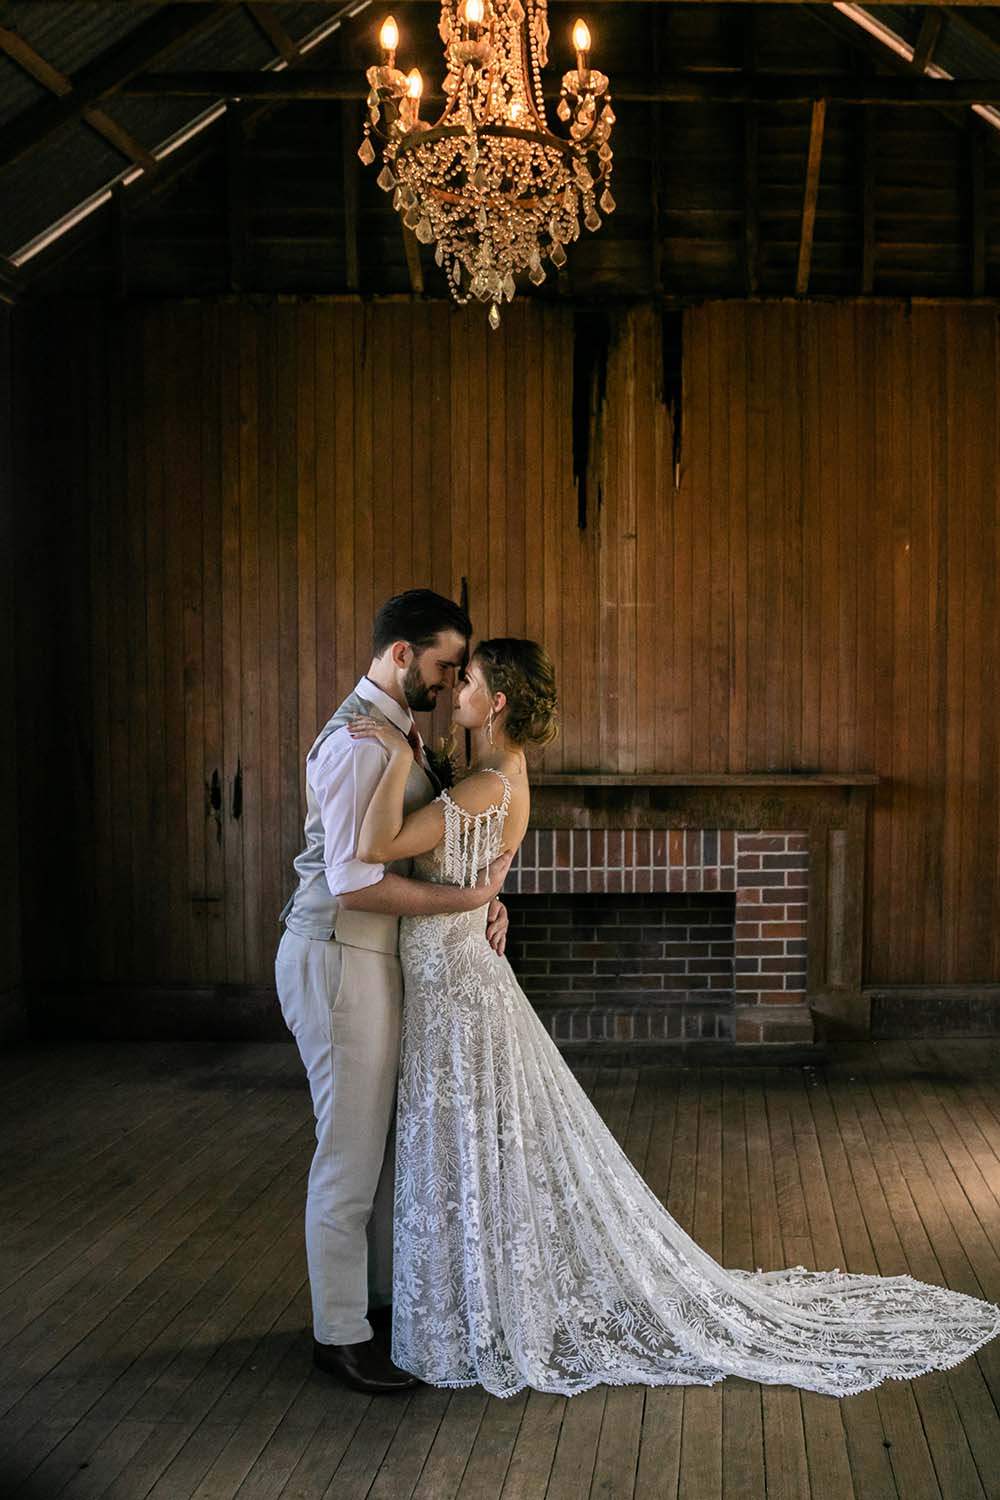 Wedding Photography - Couple embracing in rustic shed